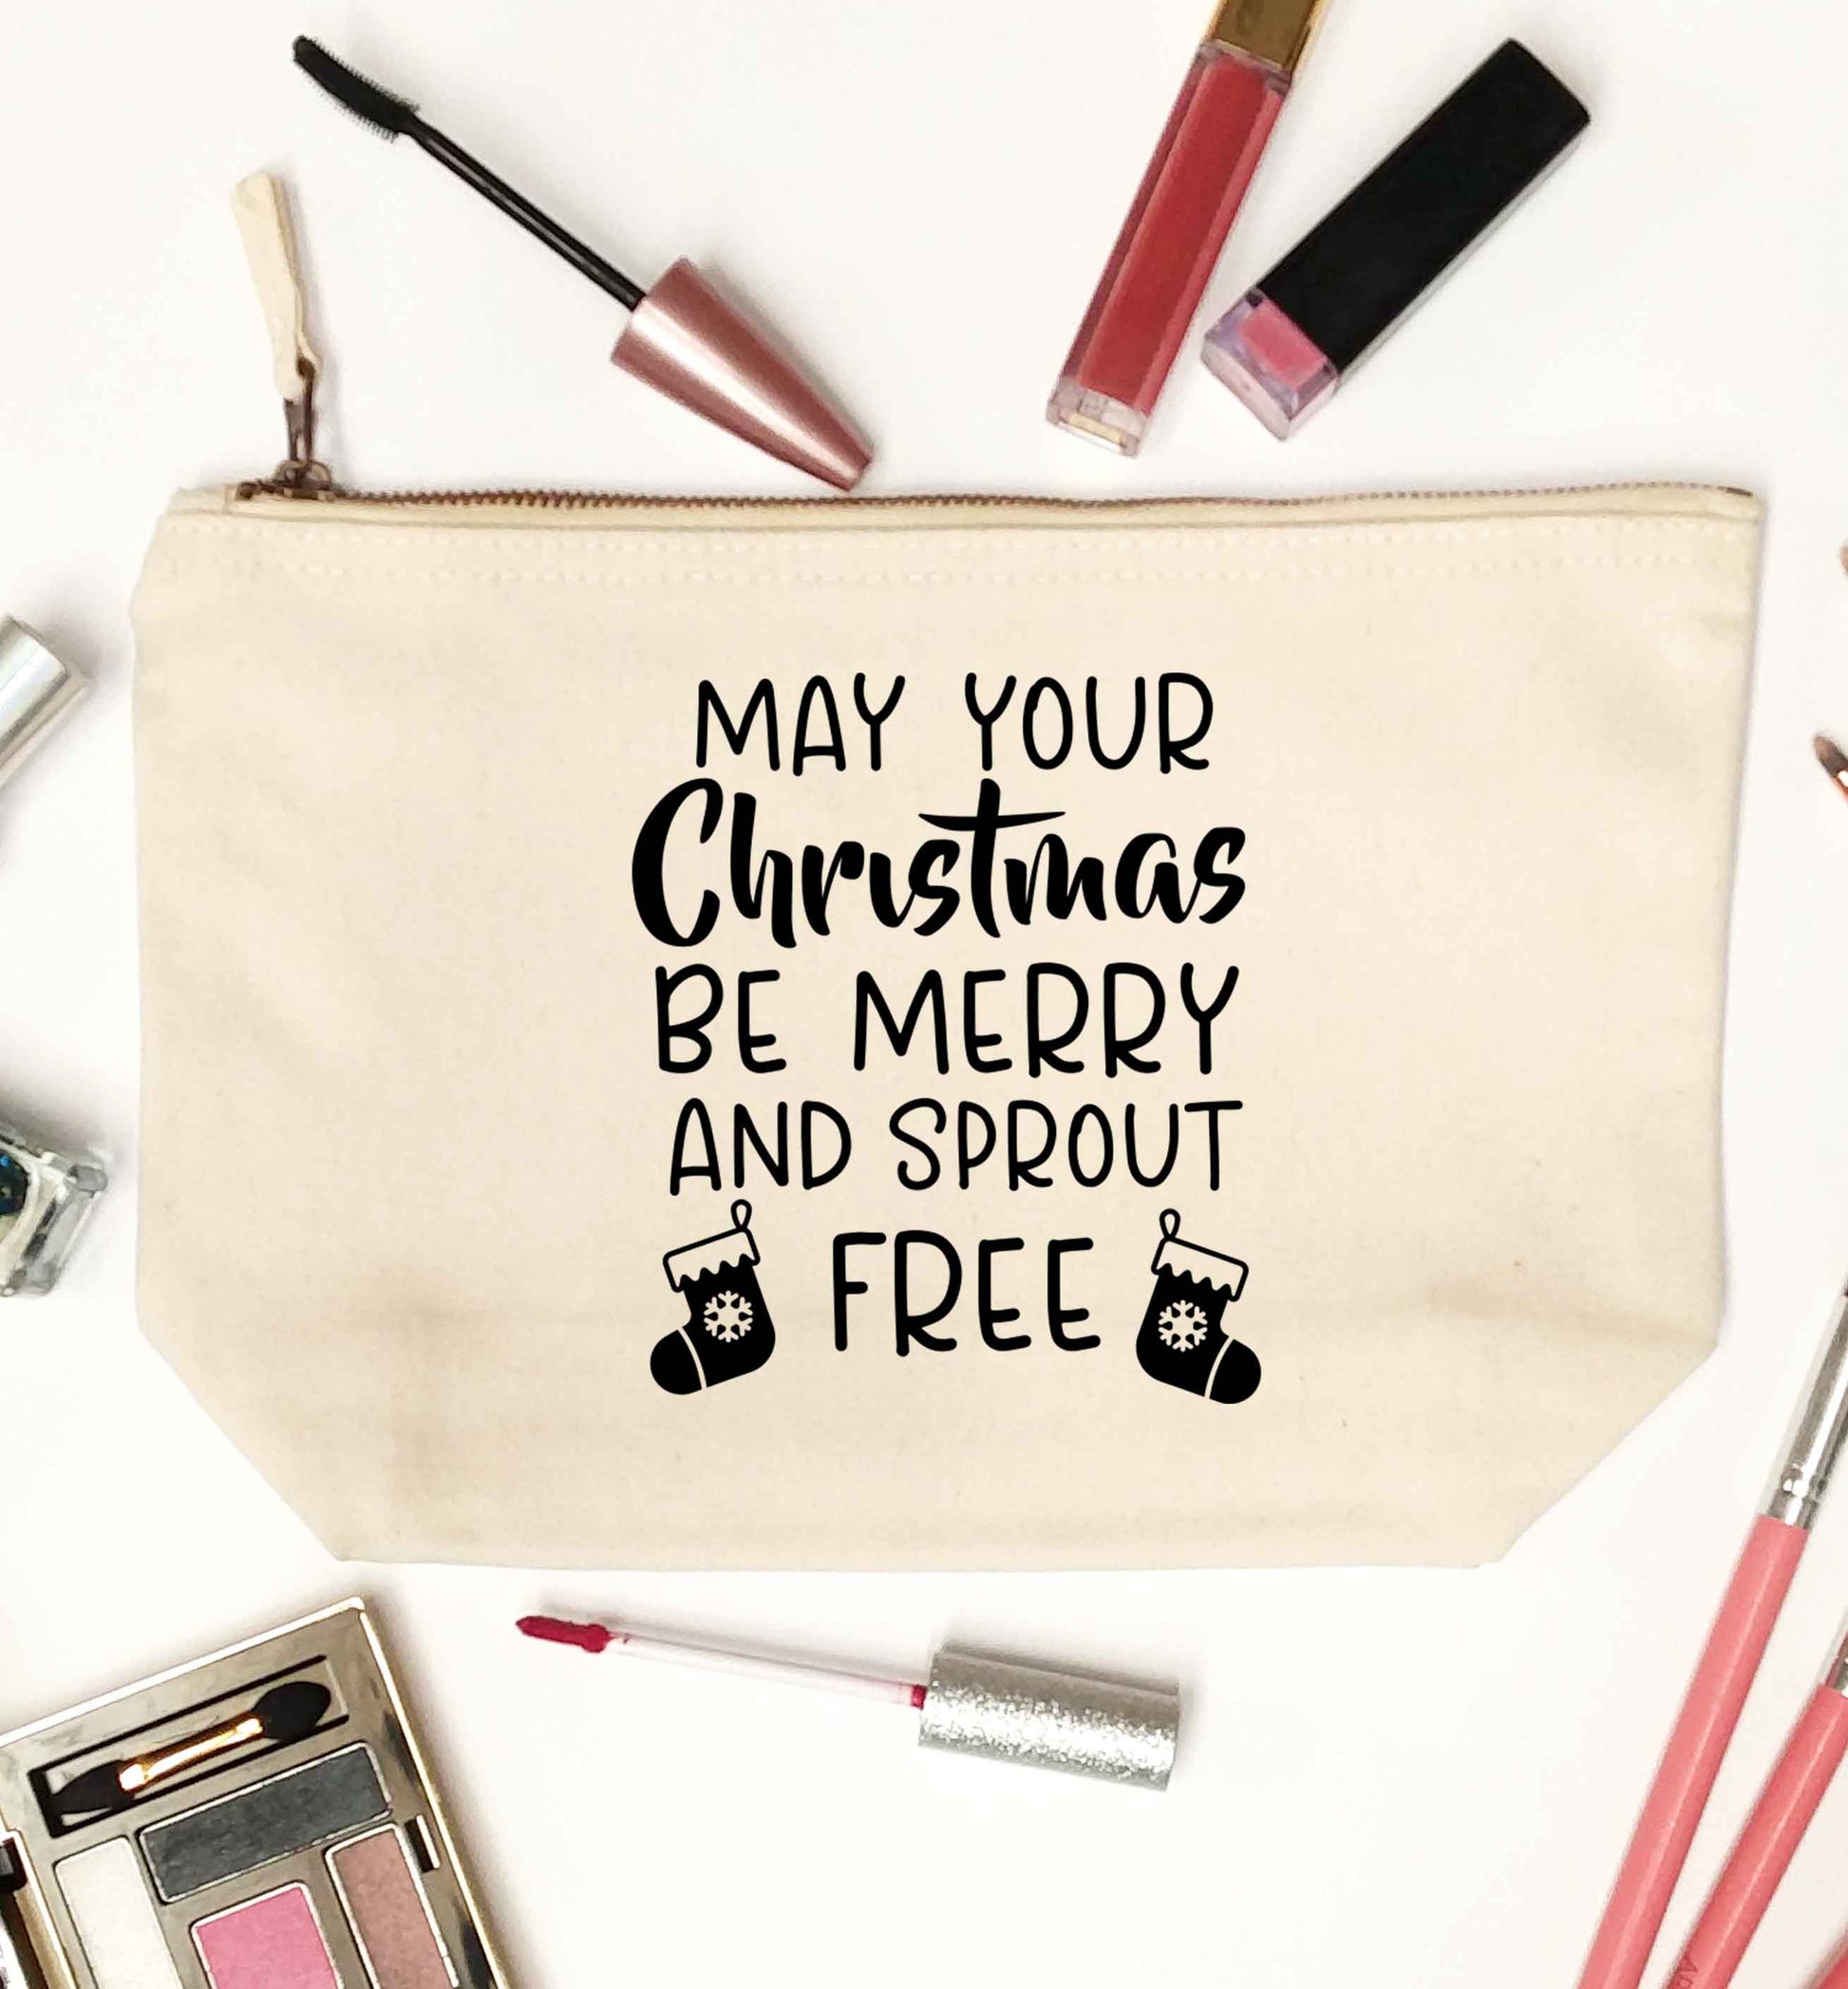 May your Christmas be merry and sprout free natural makeup bag